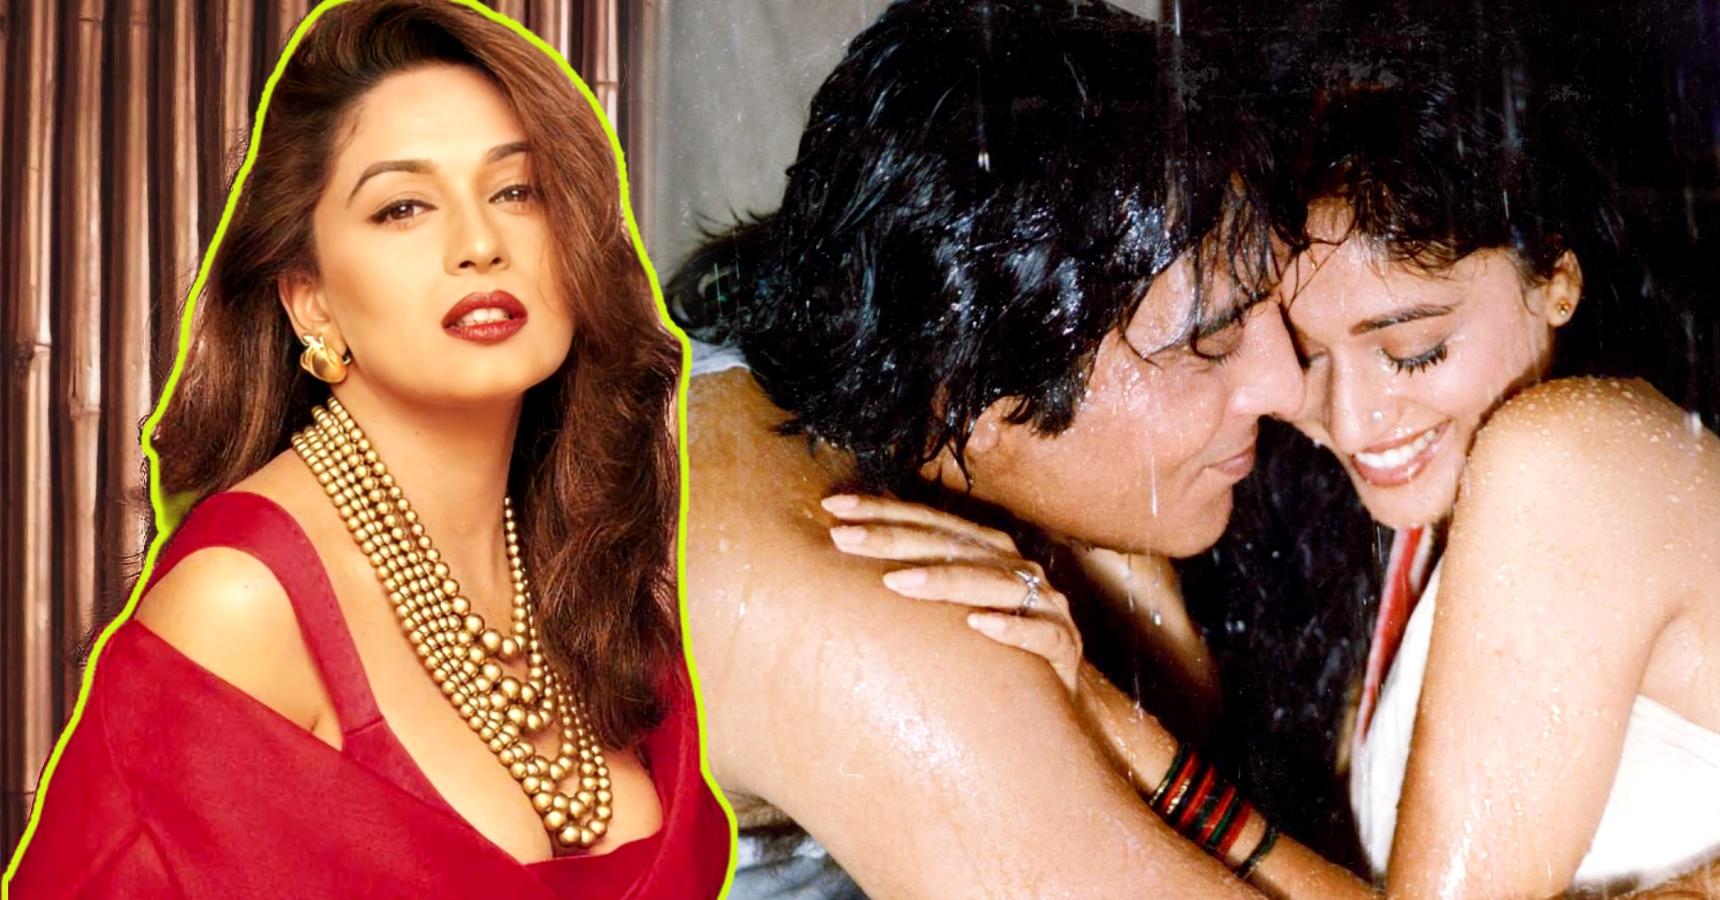 Madhuri Dixit and Vinod Khanna’s intimate scene in movie Dayavan made her famous in Bollywood